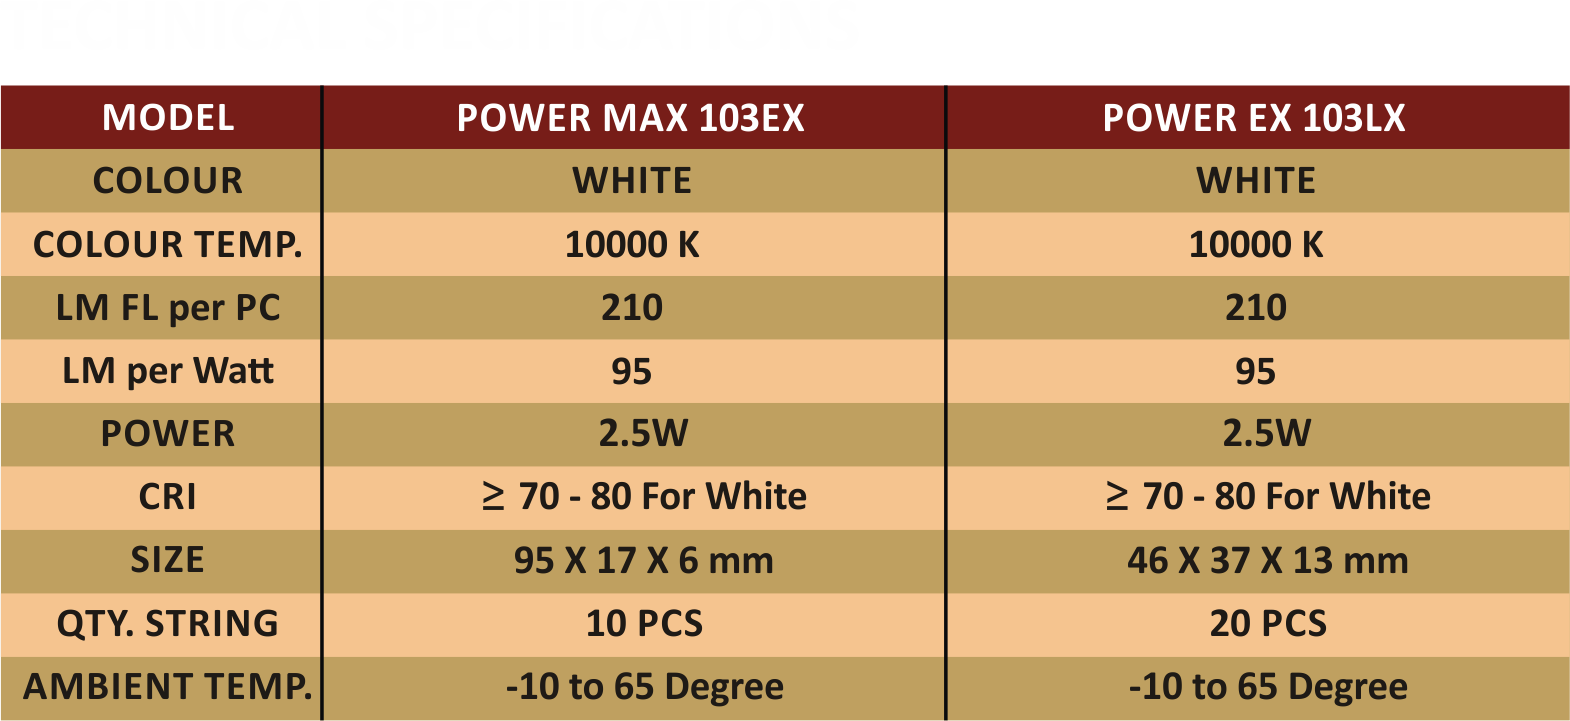 Specification/Features of Power Max & Power X